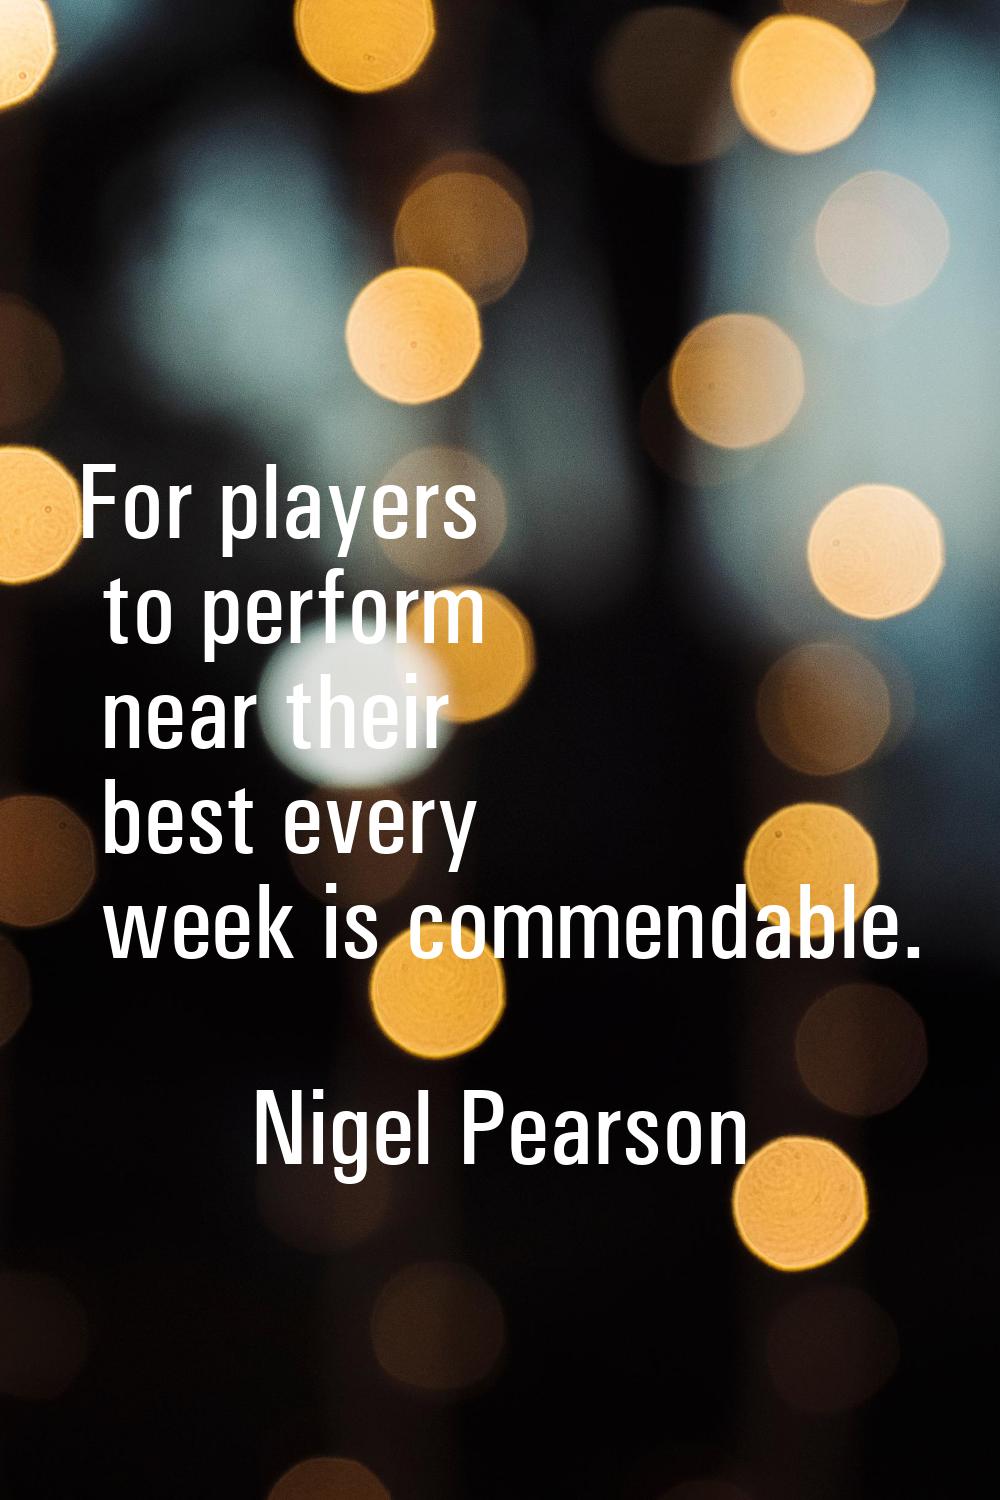 For players to perform near their best every week is commendable.